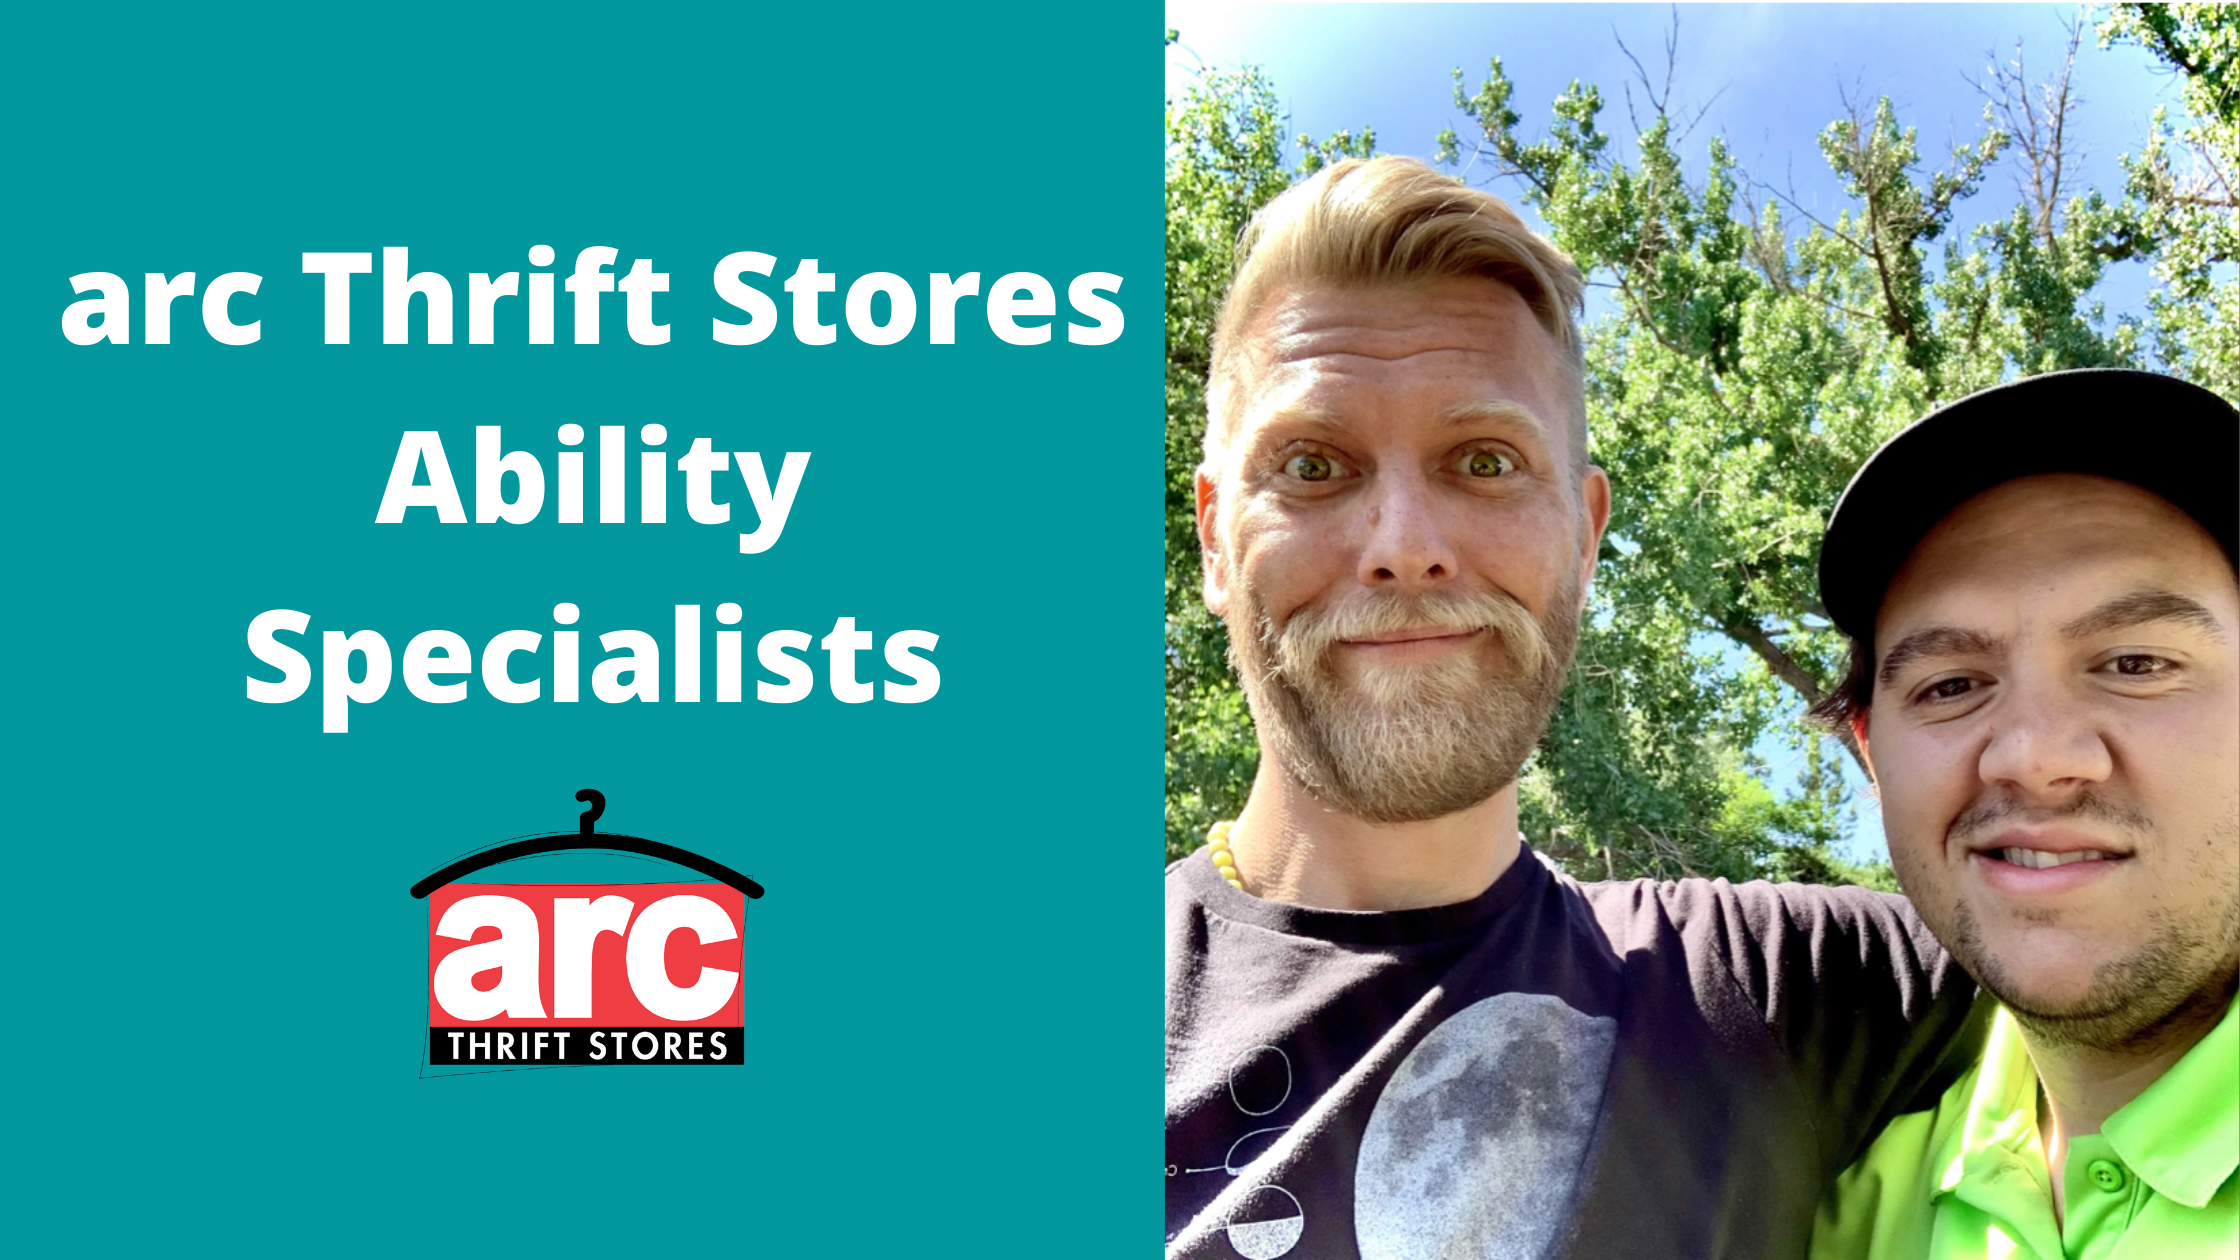 Arc Thrift Stores Ability Specialists